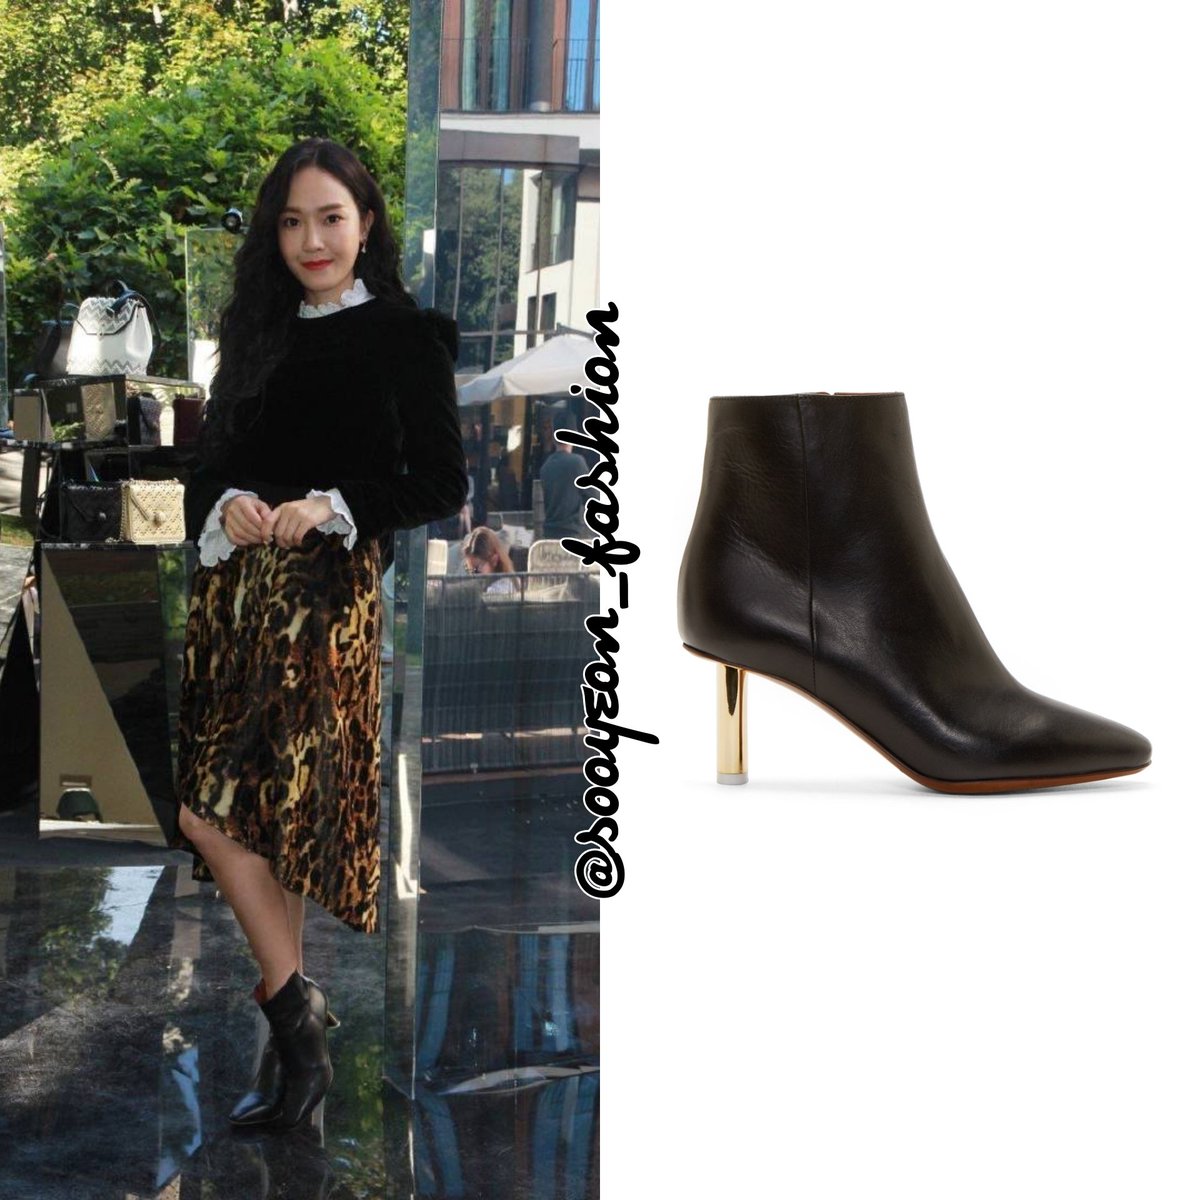 Leather Boots (Black/Gold), $651 